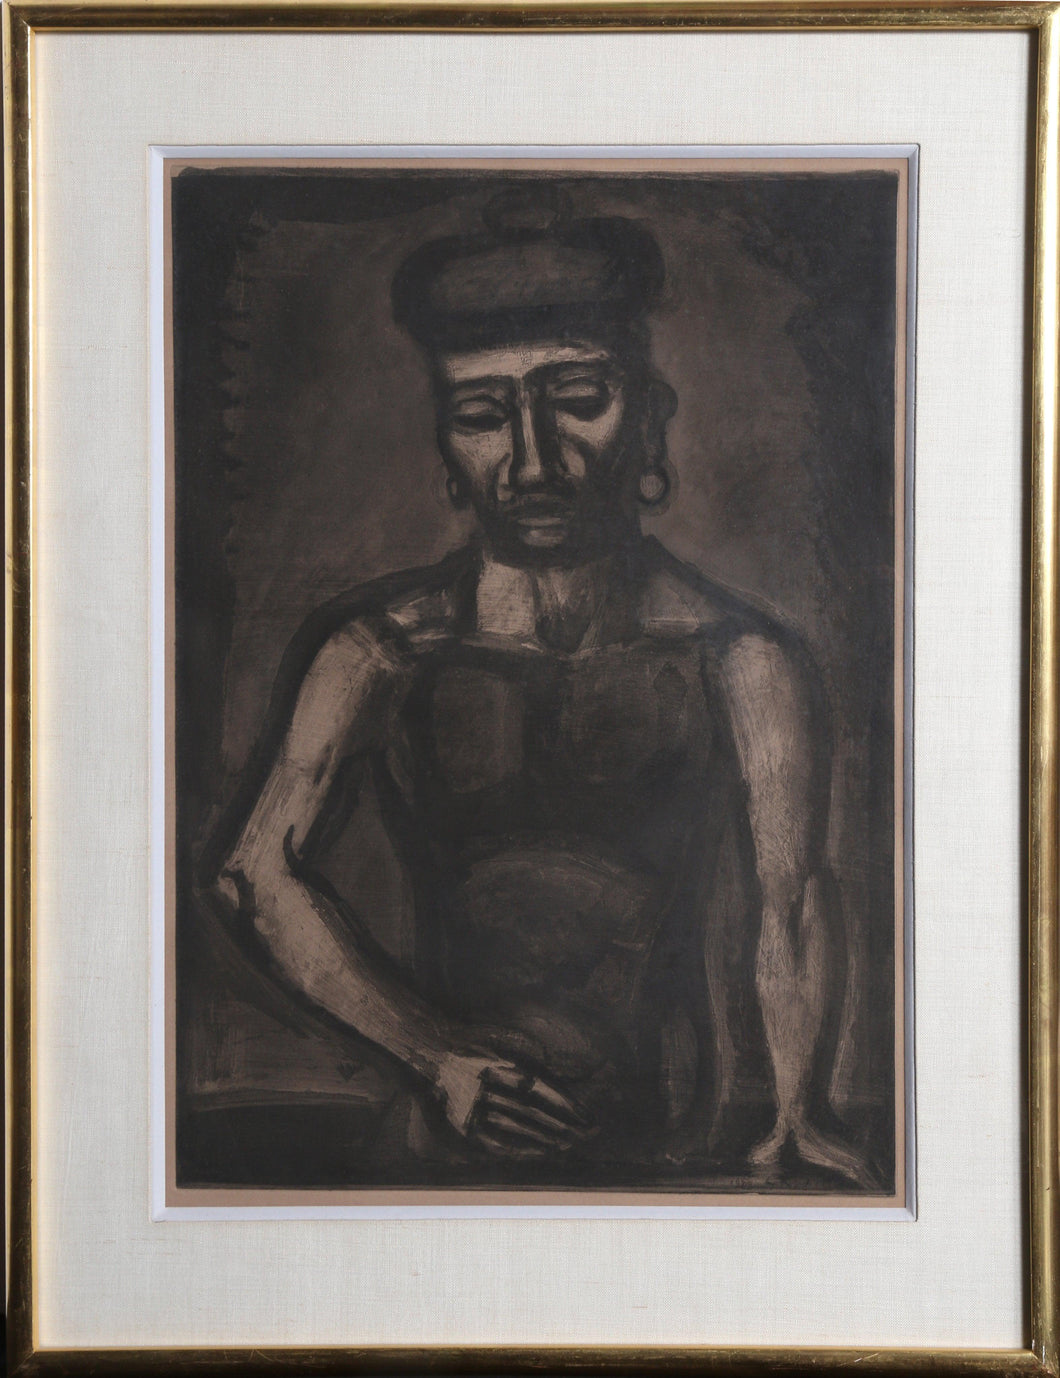 Jean-Francois ne Chante Alleluia (Jean-Francois Never Sings Alleluia) no. 25 from the Miserere et Guerre series Etching | Georges Rouault,{{product.type}}